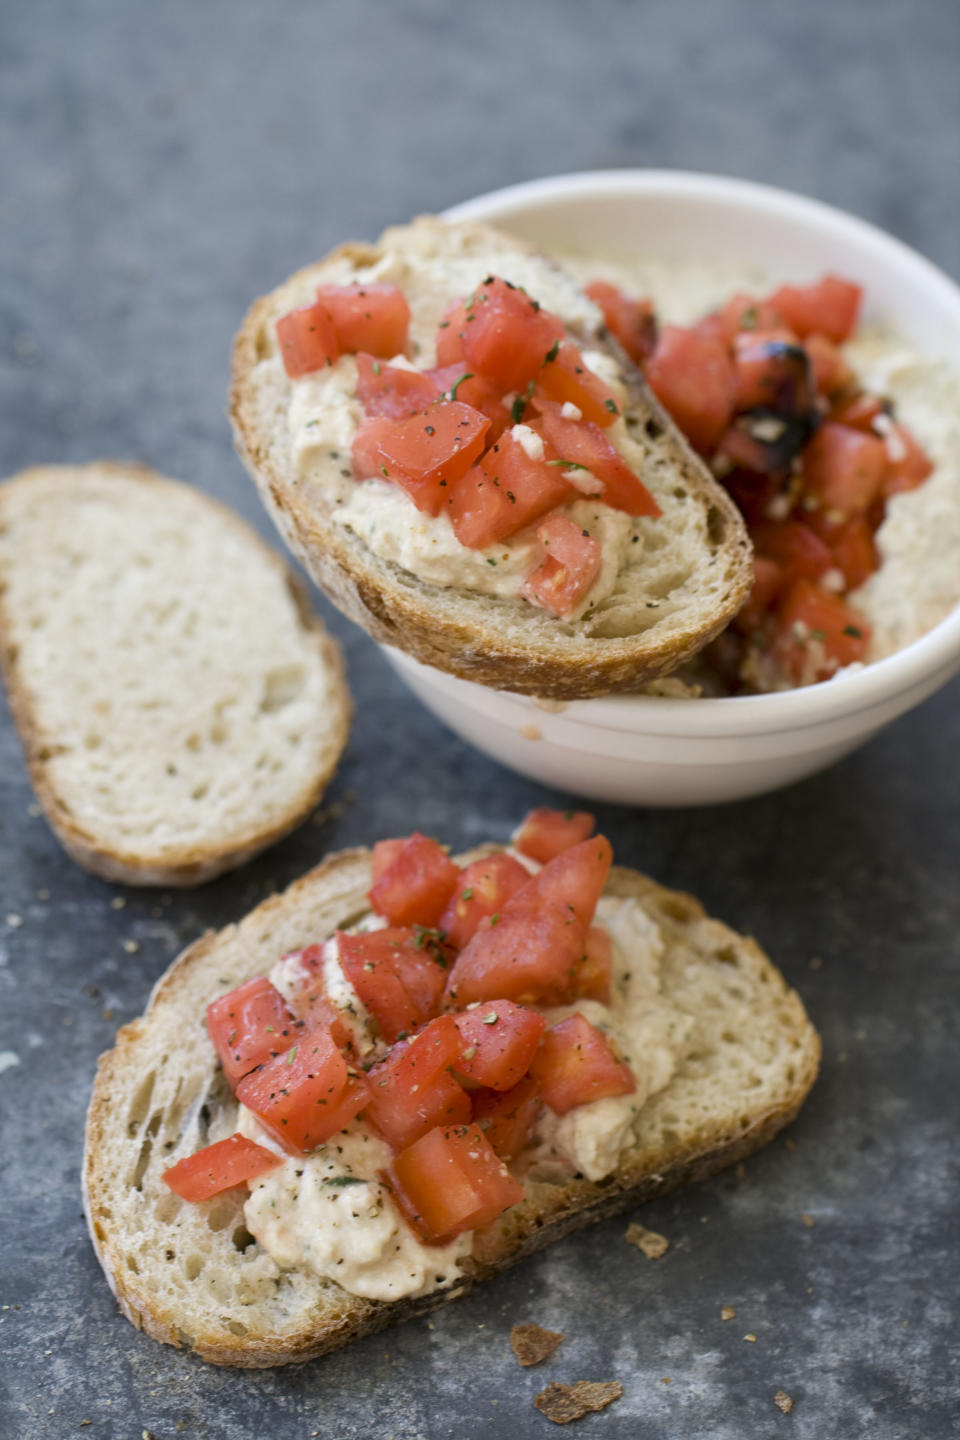 This Sept. 30, 2013 photo shows Italian-style hummus with diced tomatoes in Concord, N.H. (AP Photo/Matthew Mead)